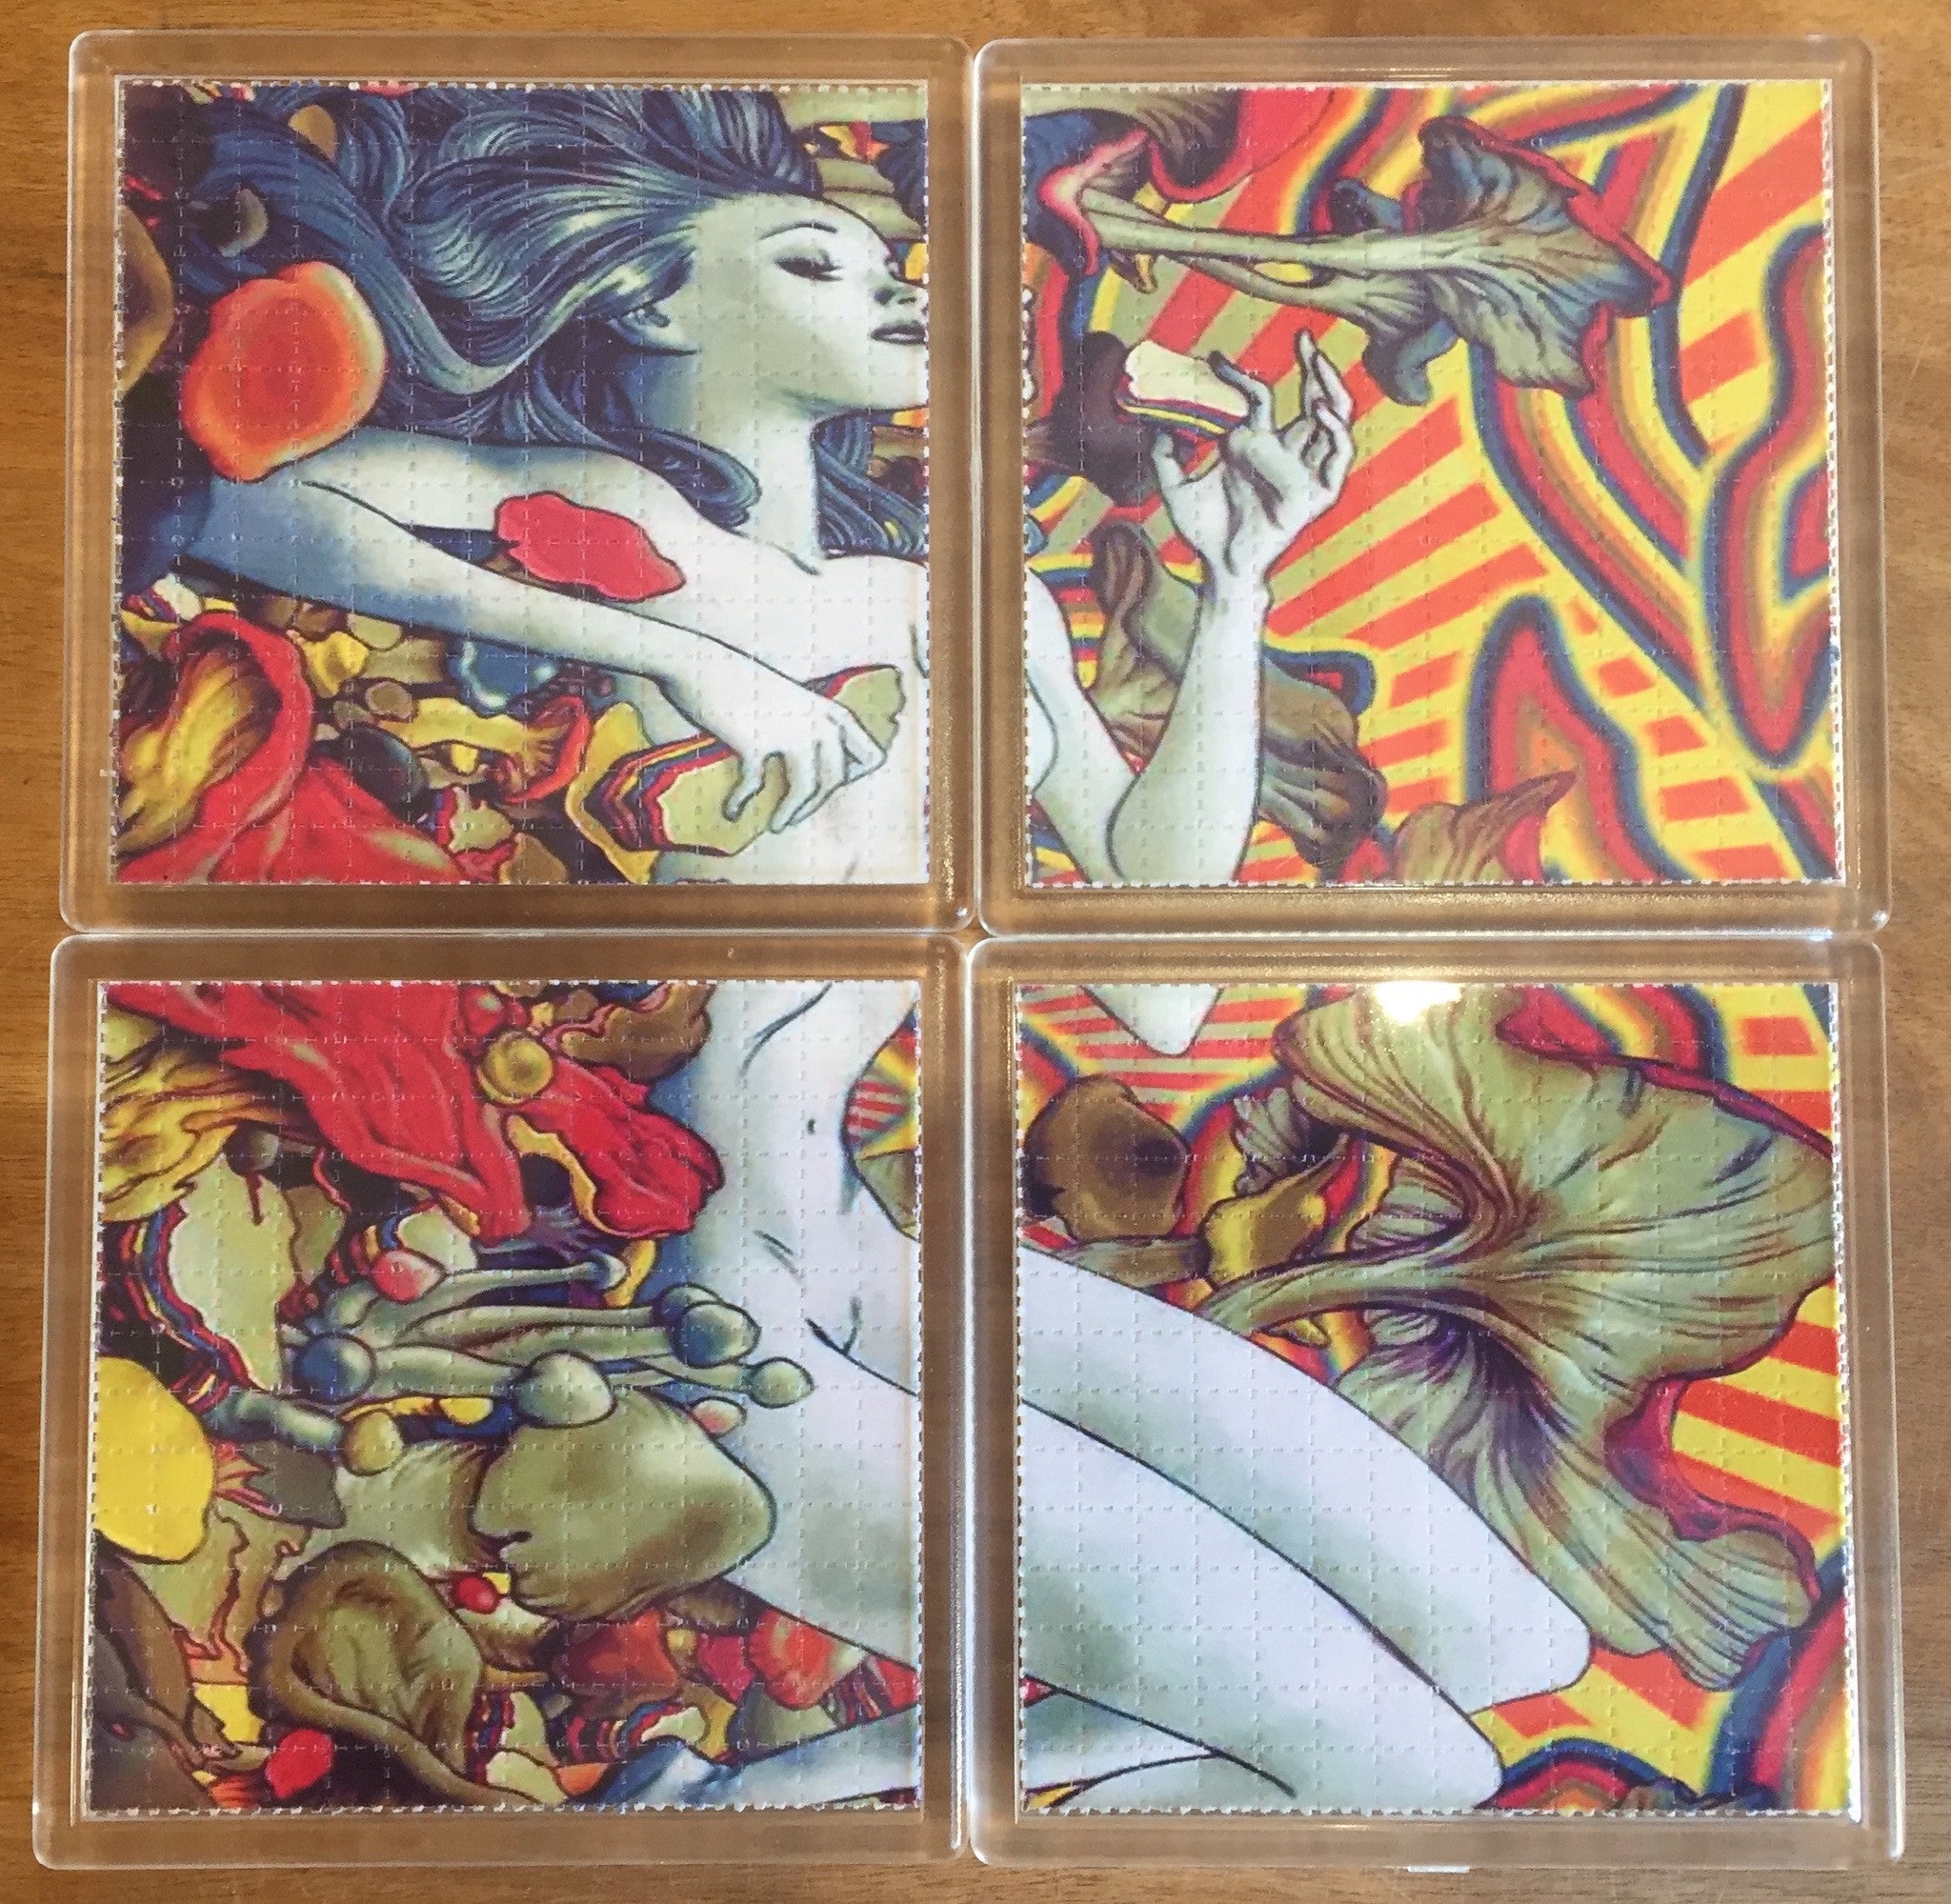 Psychedelic Naked Girl Psychedelic - Blotter Art - Highly Collectible Artwork Blotter Paper Coaster (4 pack)